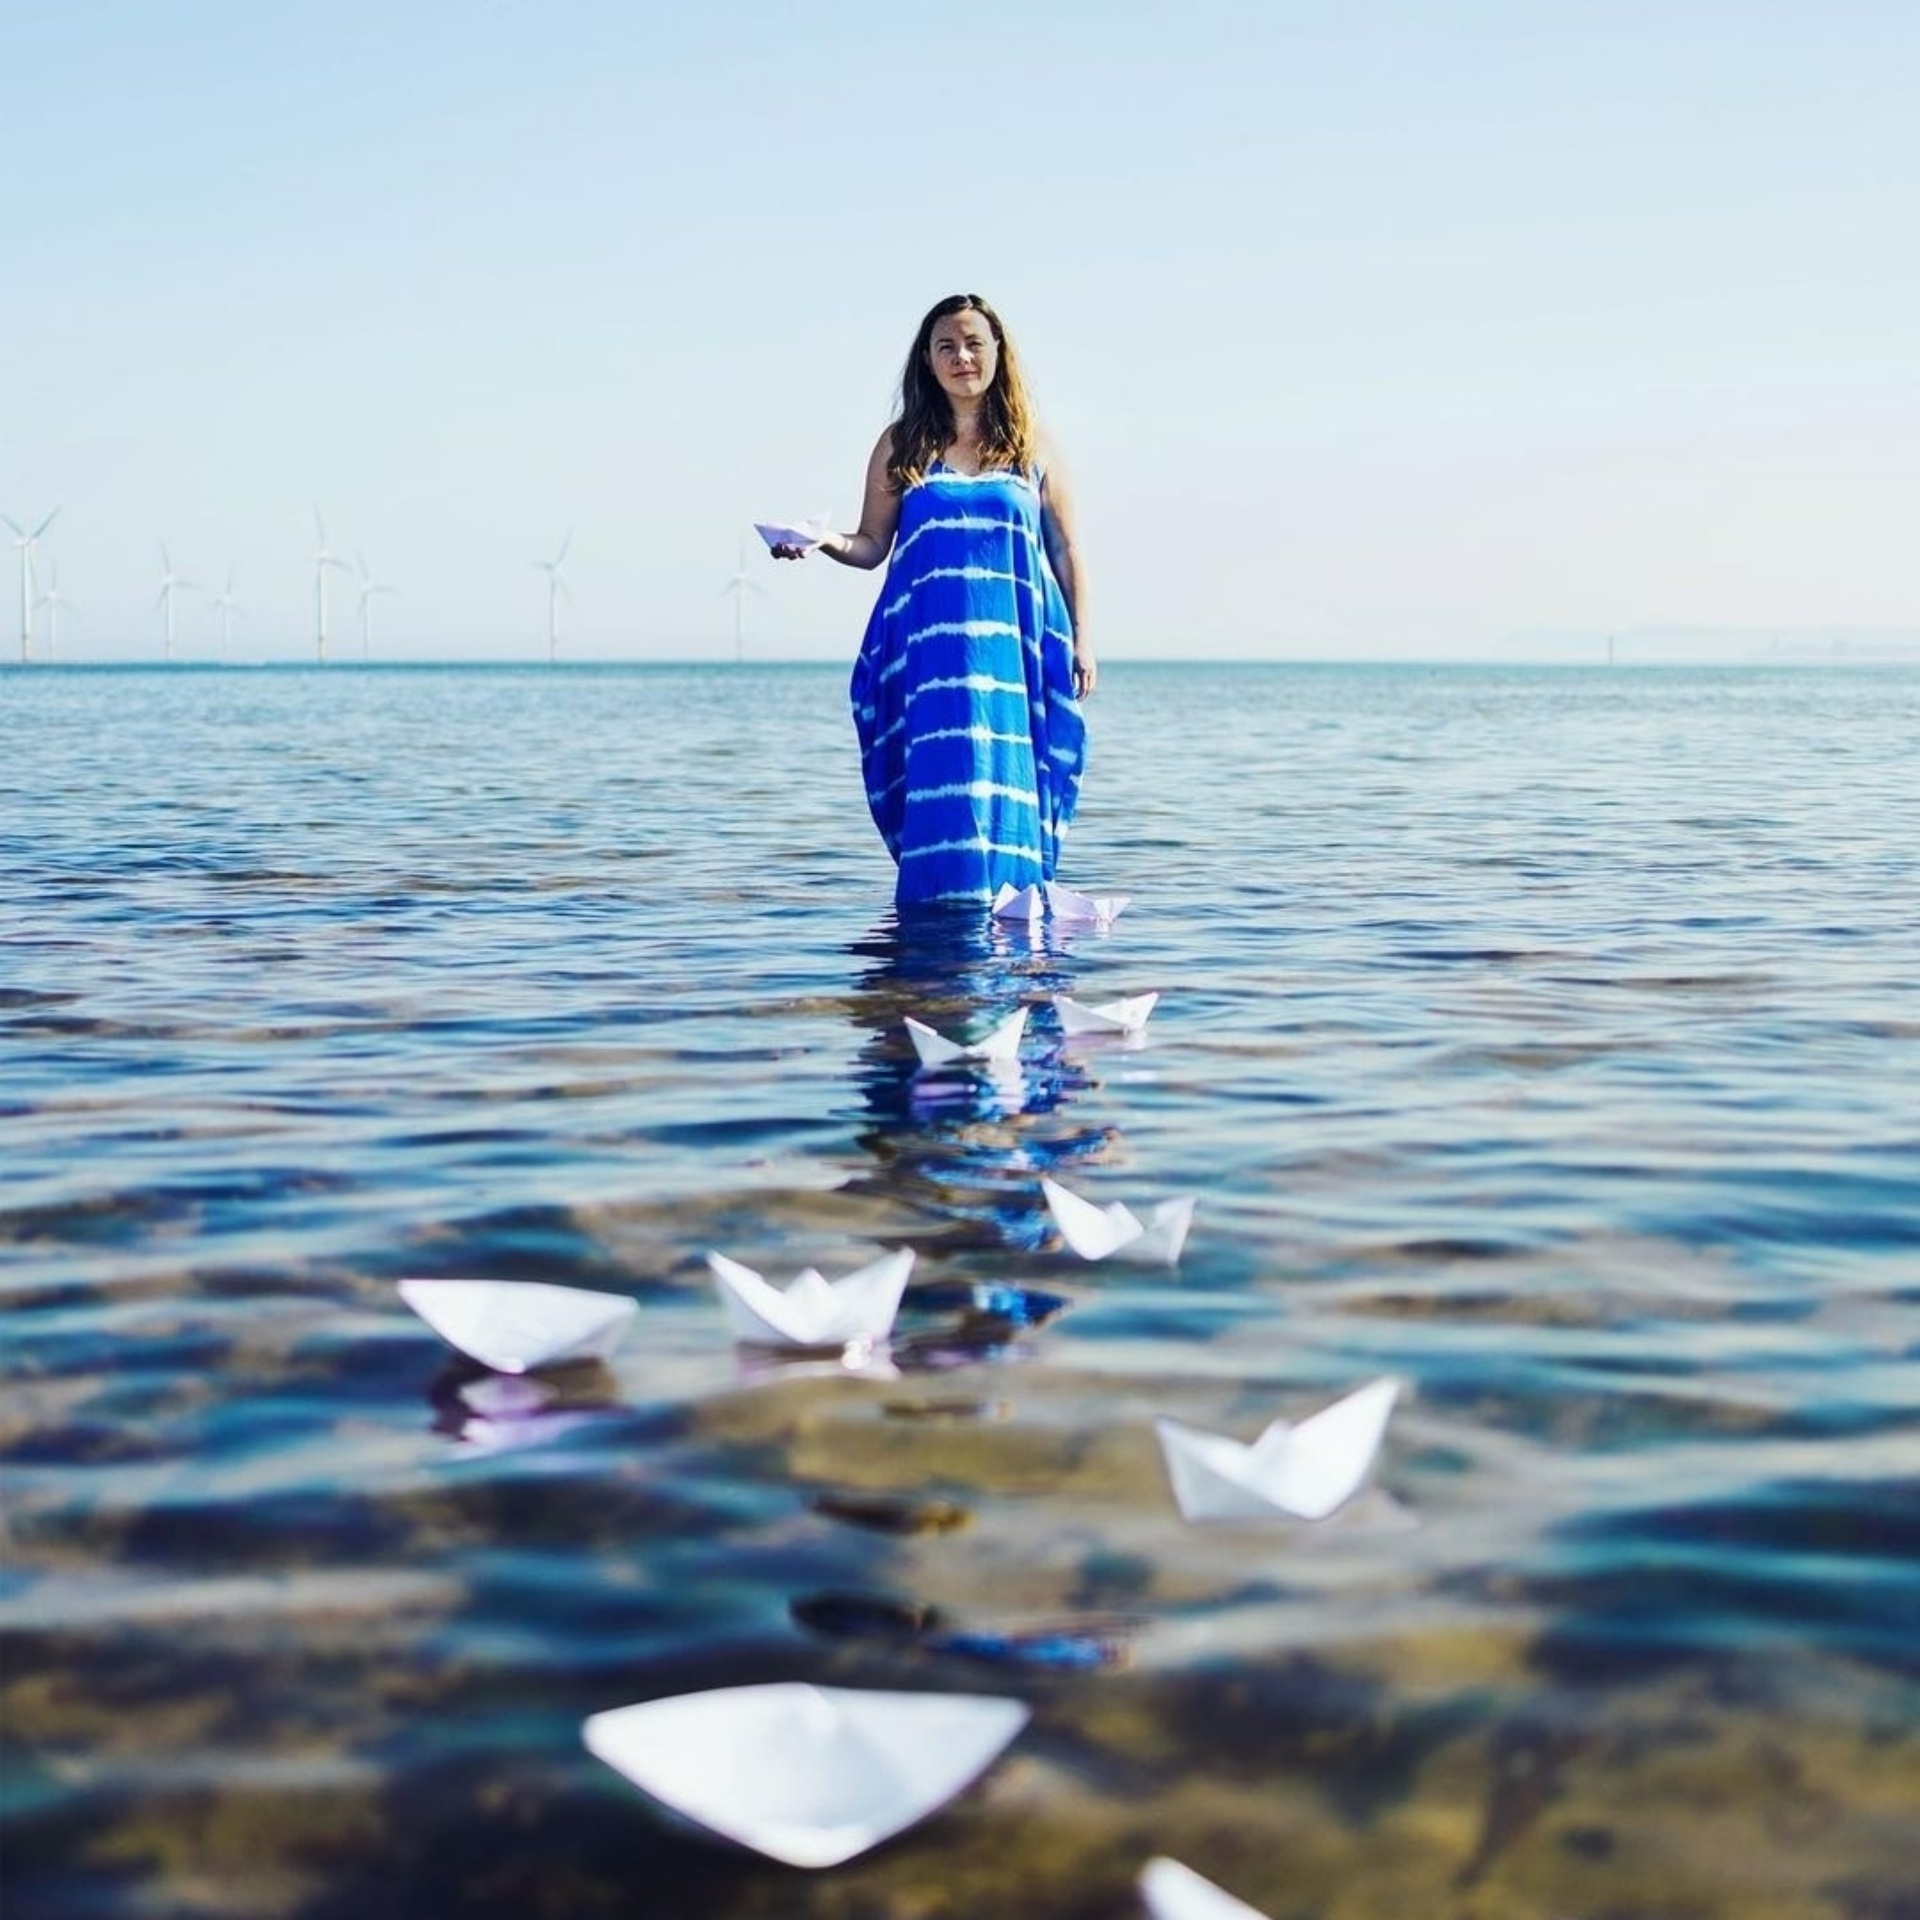 Lisette stands on a rocks surrounded by sea water. She wears her hair down and a long blue dress. Her right hand is held out in front of her, floating on the water a several white origami paper boats.